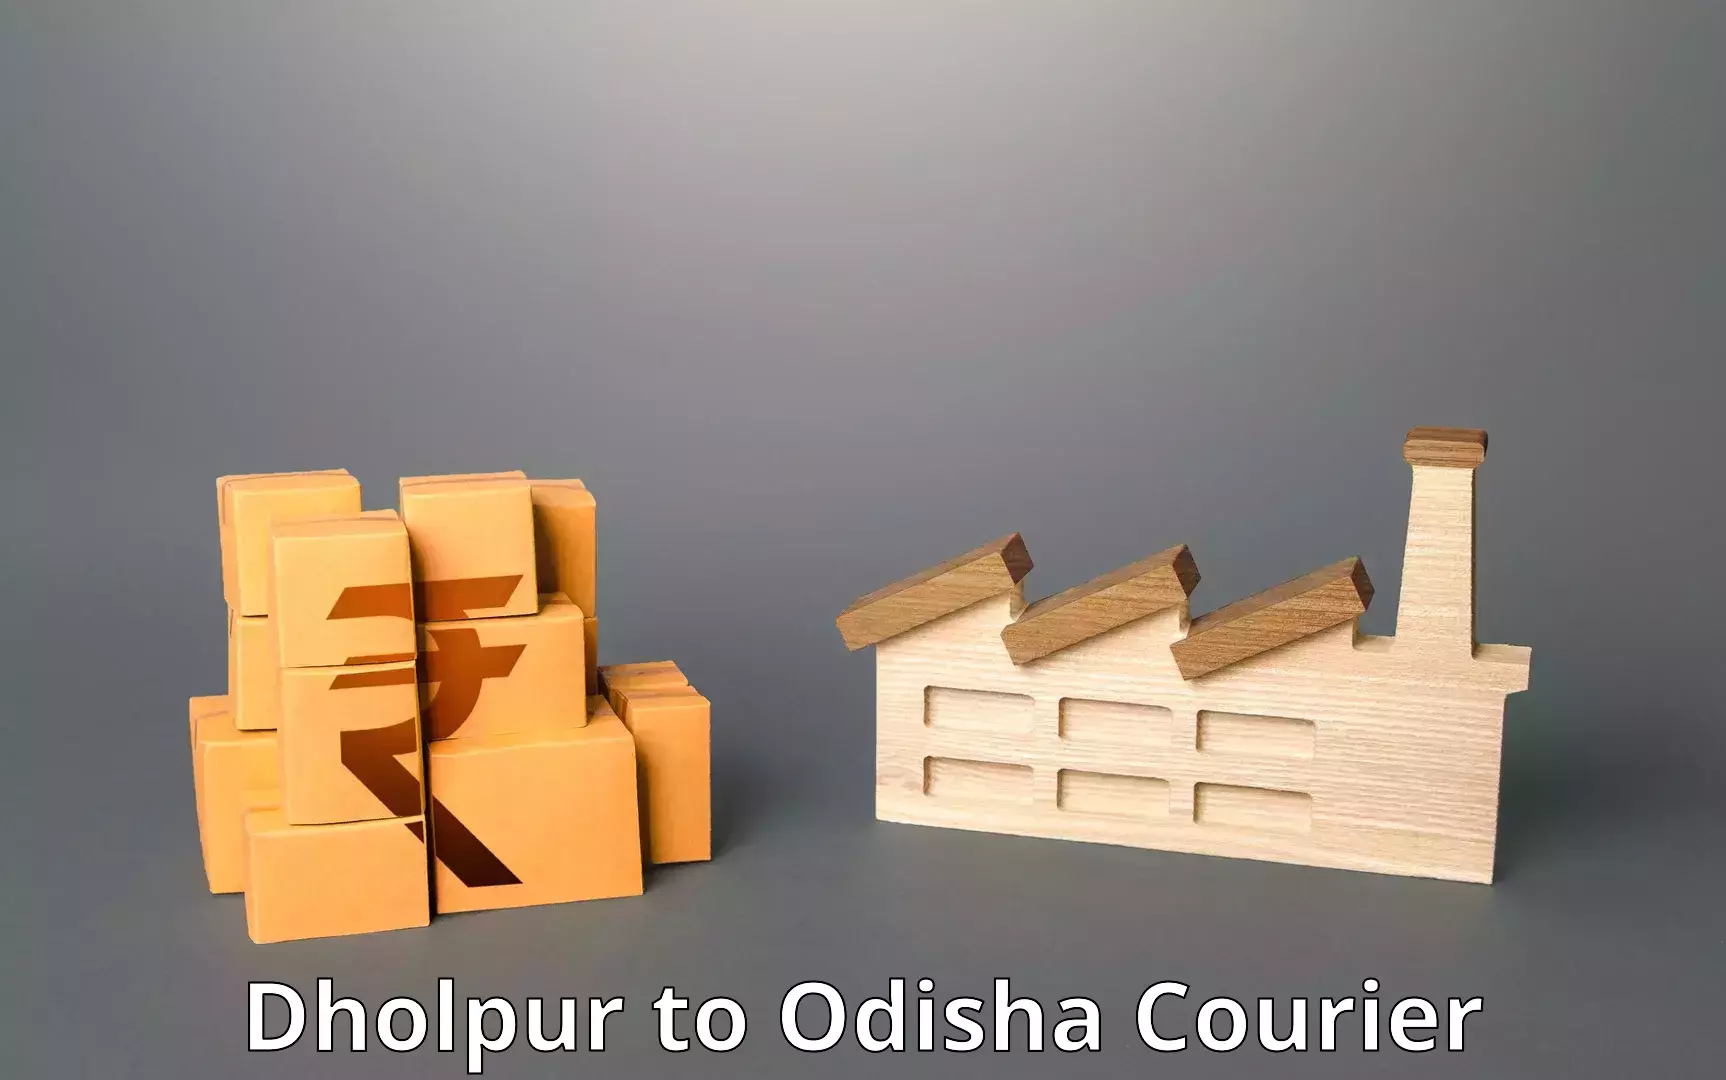 Courier service innovation Dholpur to Odisha